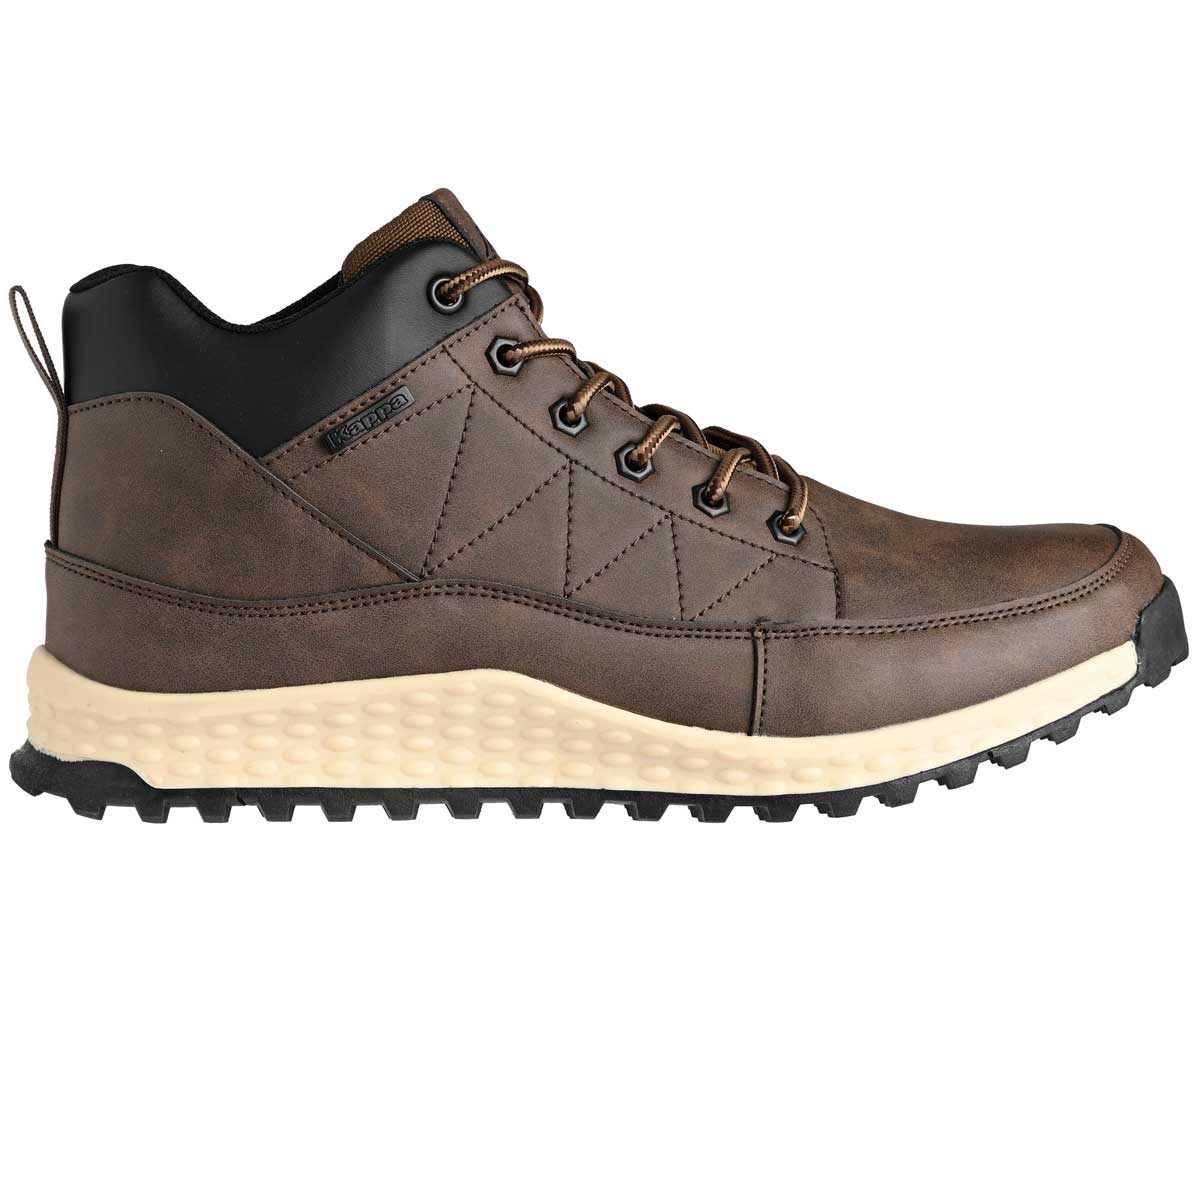 Chaussures lifestyle Andem marron homme